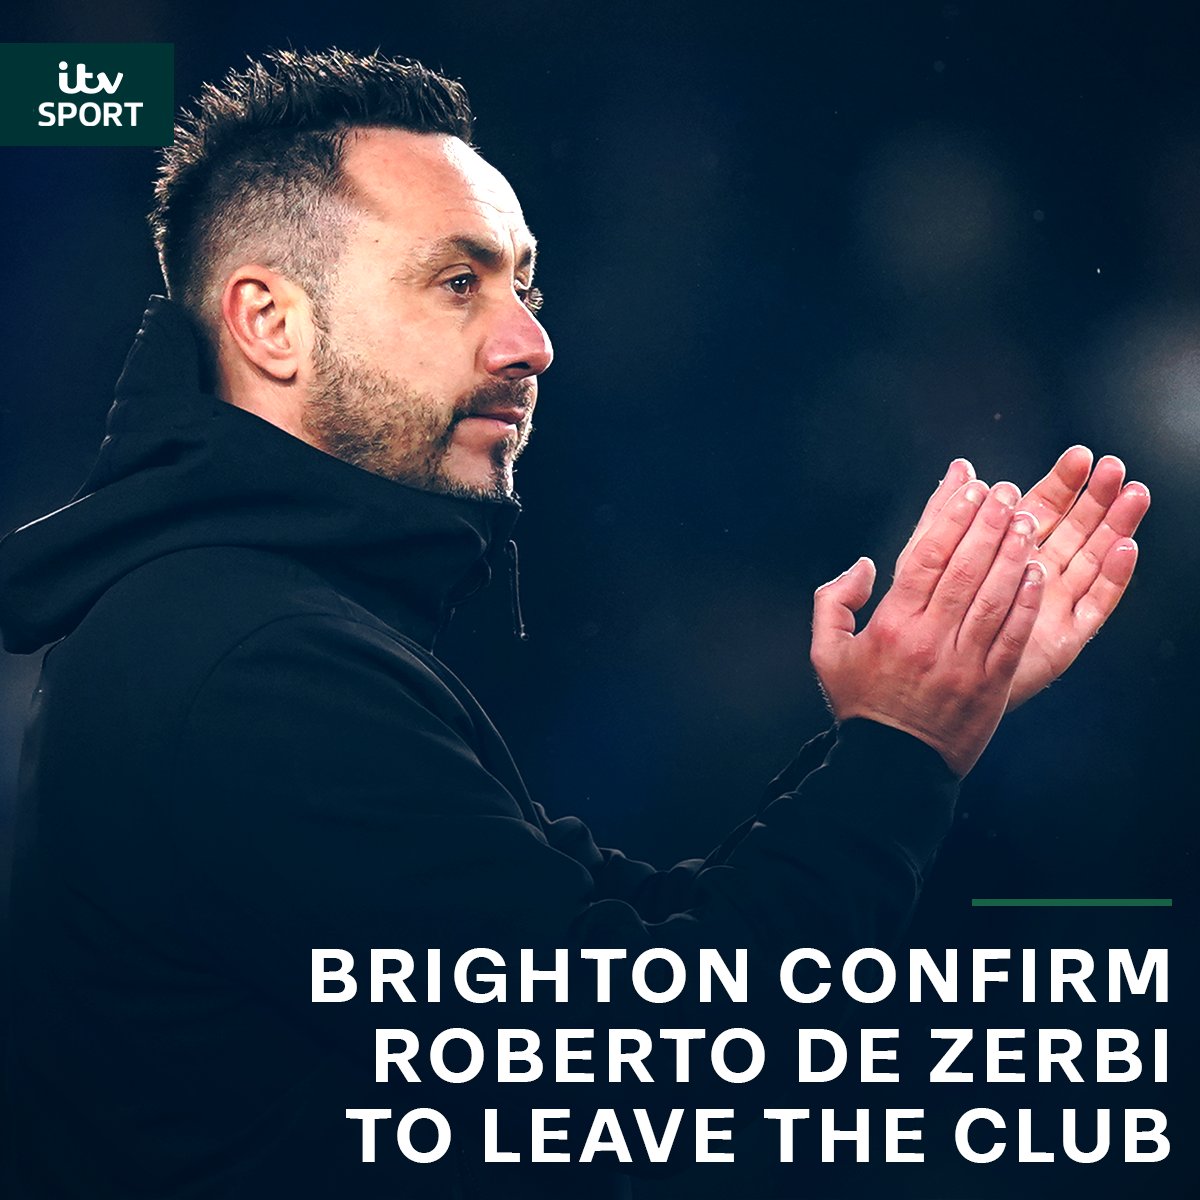 😱 Who saw this one coming?! Brighton & Hove Albion have confirmed that Roberto De Zerbi will leave the club after their final Premier League match of the season against Manchester United.